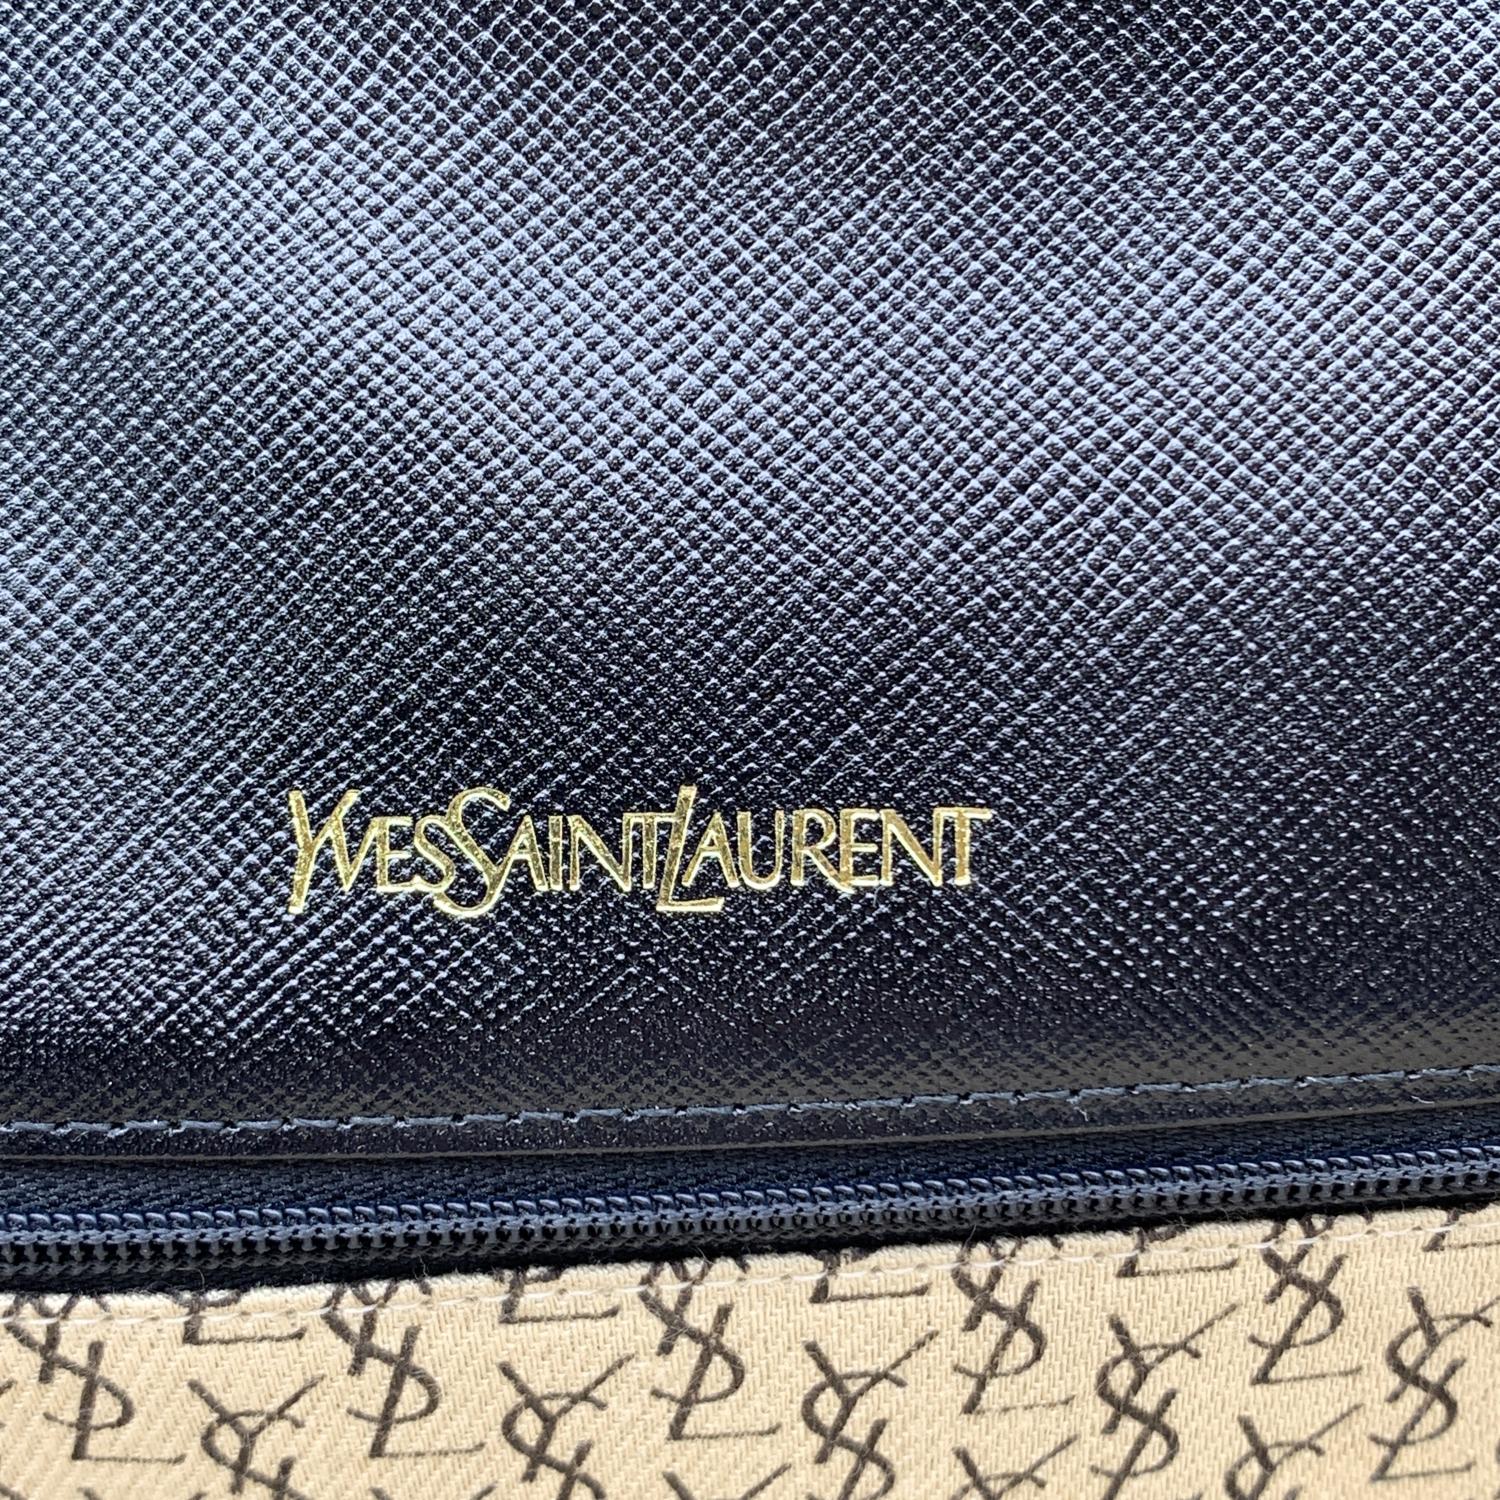 Yves Saint Laurent vintage clutch bag, crafted in black leather. It features a flap with magnetic button closure on the front. YSL logo on the front. 1 rear open pocket. Beige fabric lining. 1 side zip pocket inside. 'YVES SAINT LAURENT'embossed